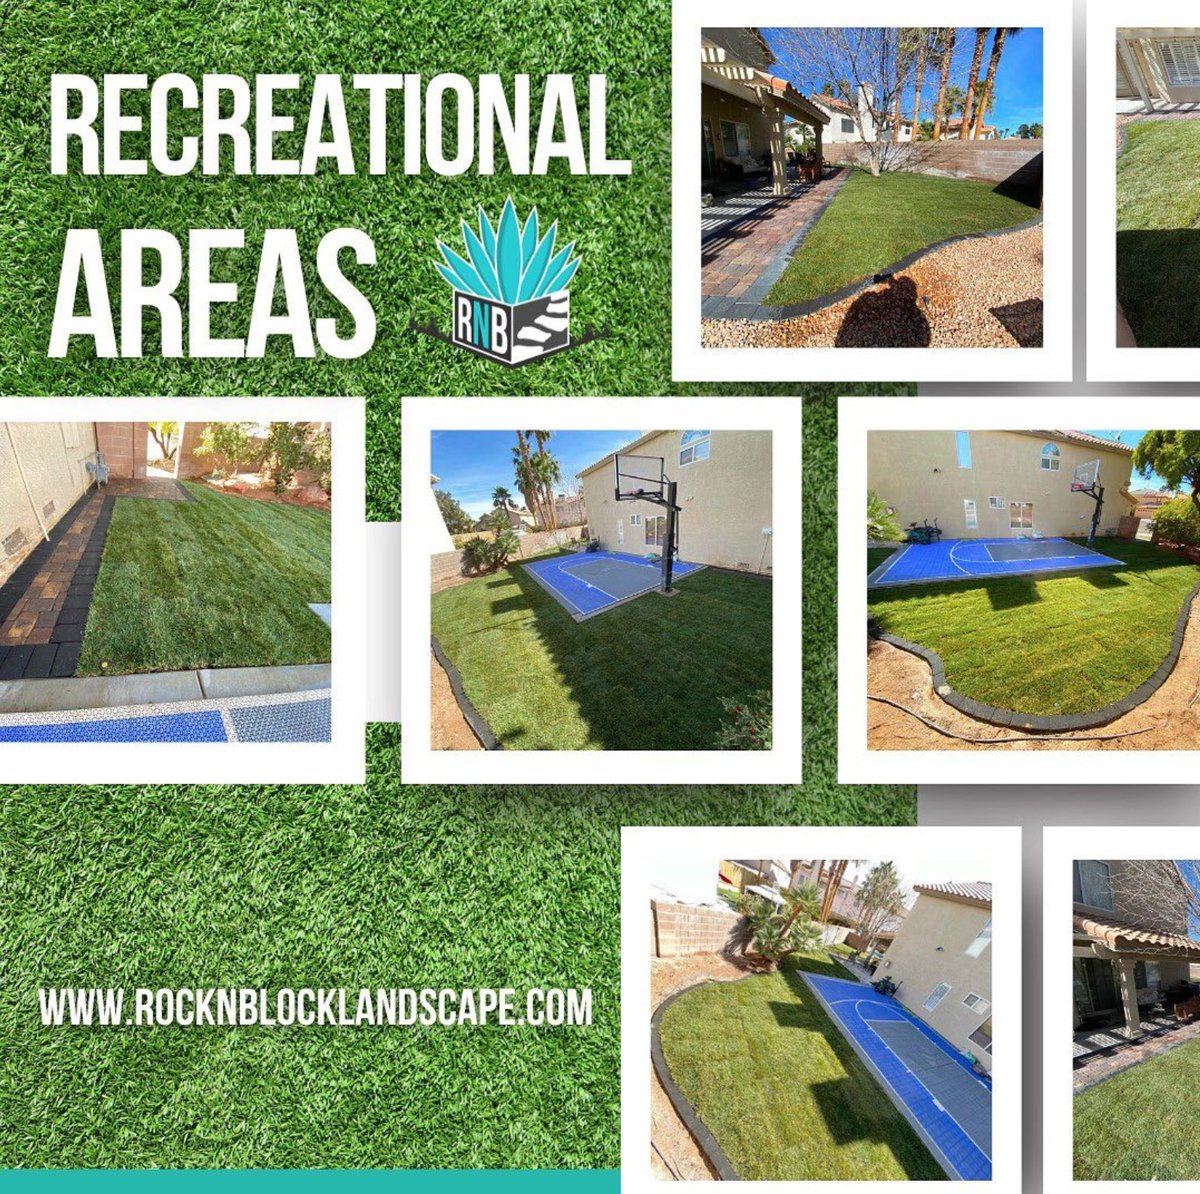 Looking for ideas to improve your landscaping? Together we can create the best design for your property 
Contact us!
#landscape #landscapedesign #lasvegas #artificialturf #syntheticgrass #sodinstallation #summerlinlv #homeimprovement #SanDiego #Denver #LasVegas   #syntheticgrass